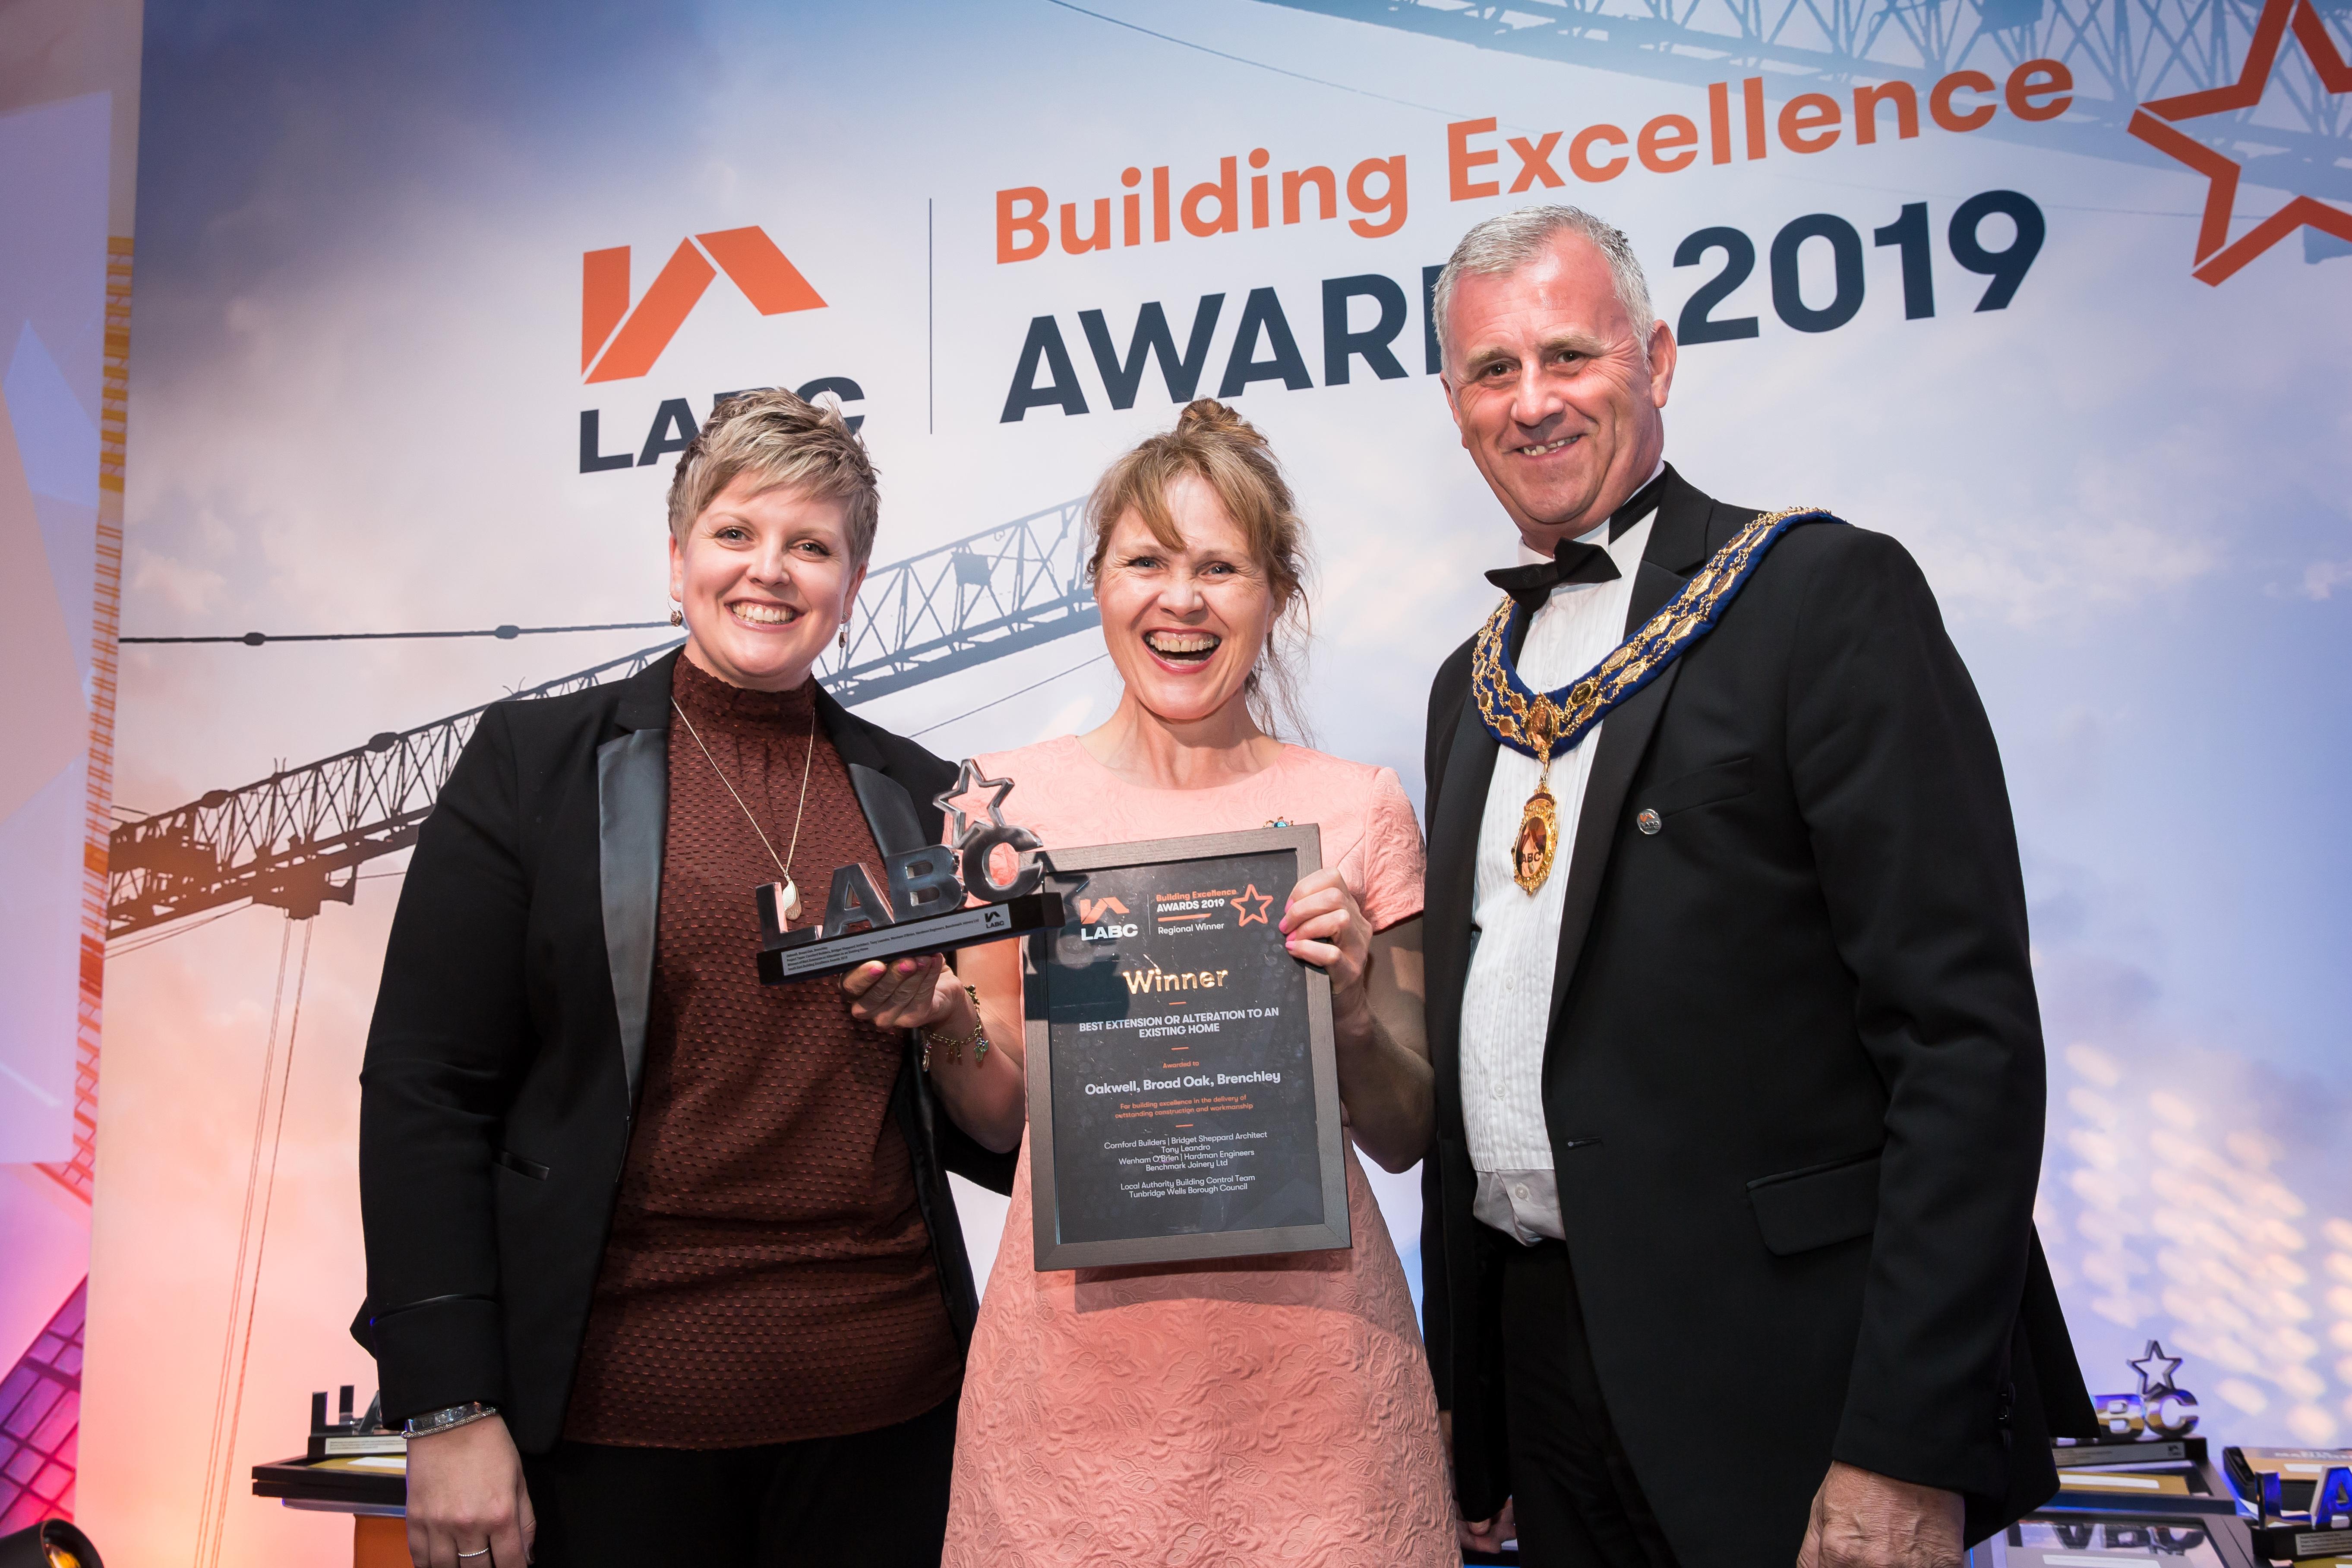 South East LABC Building Excellence Awards